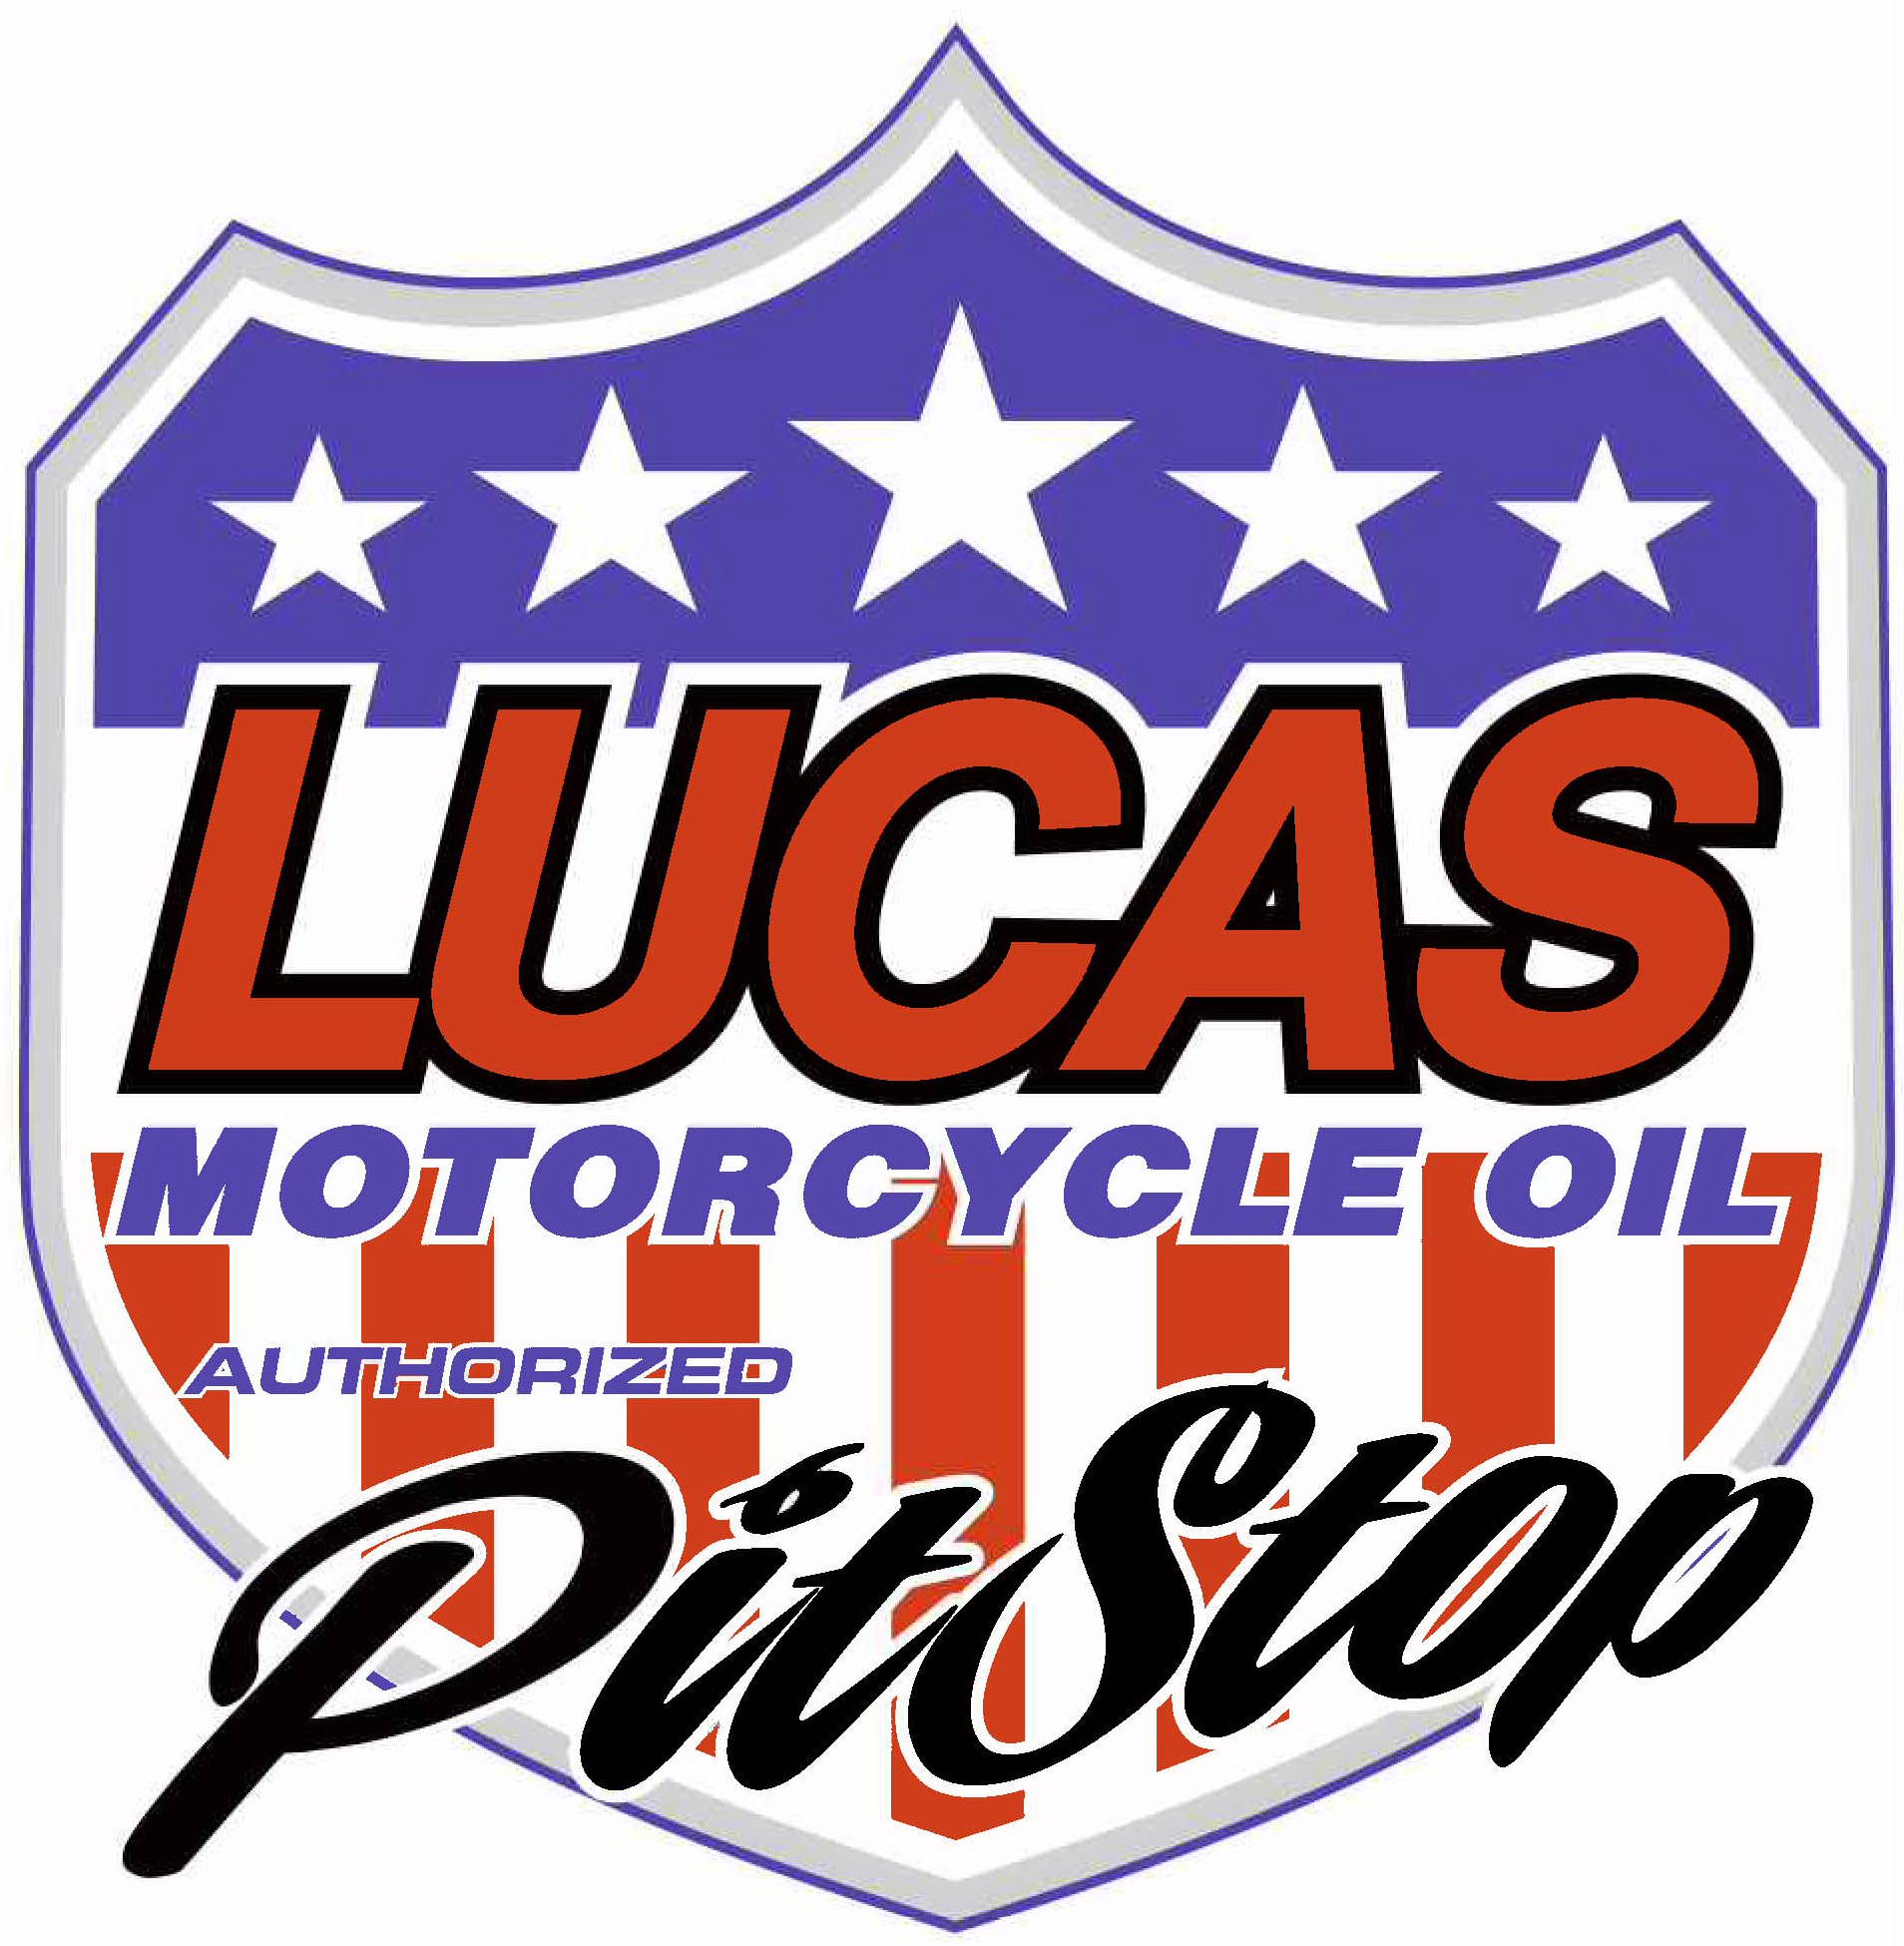  LUCAS MOTORCYCLE OIL AUTHORIZED PIT STOP